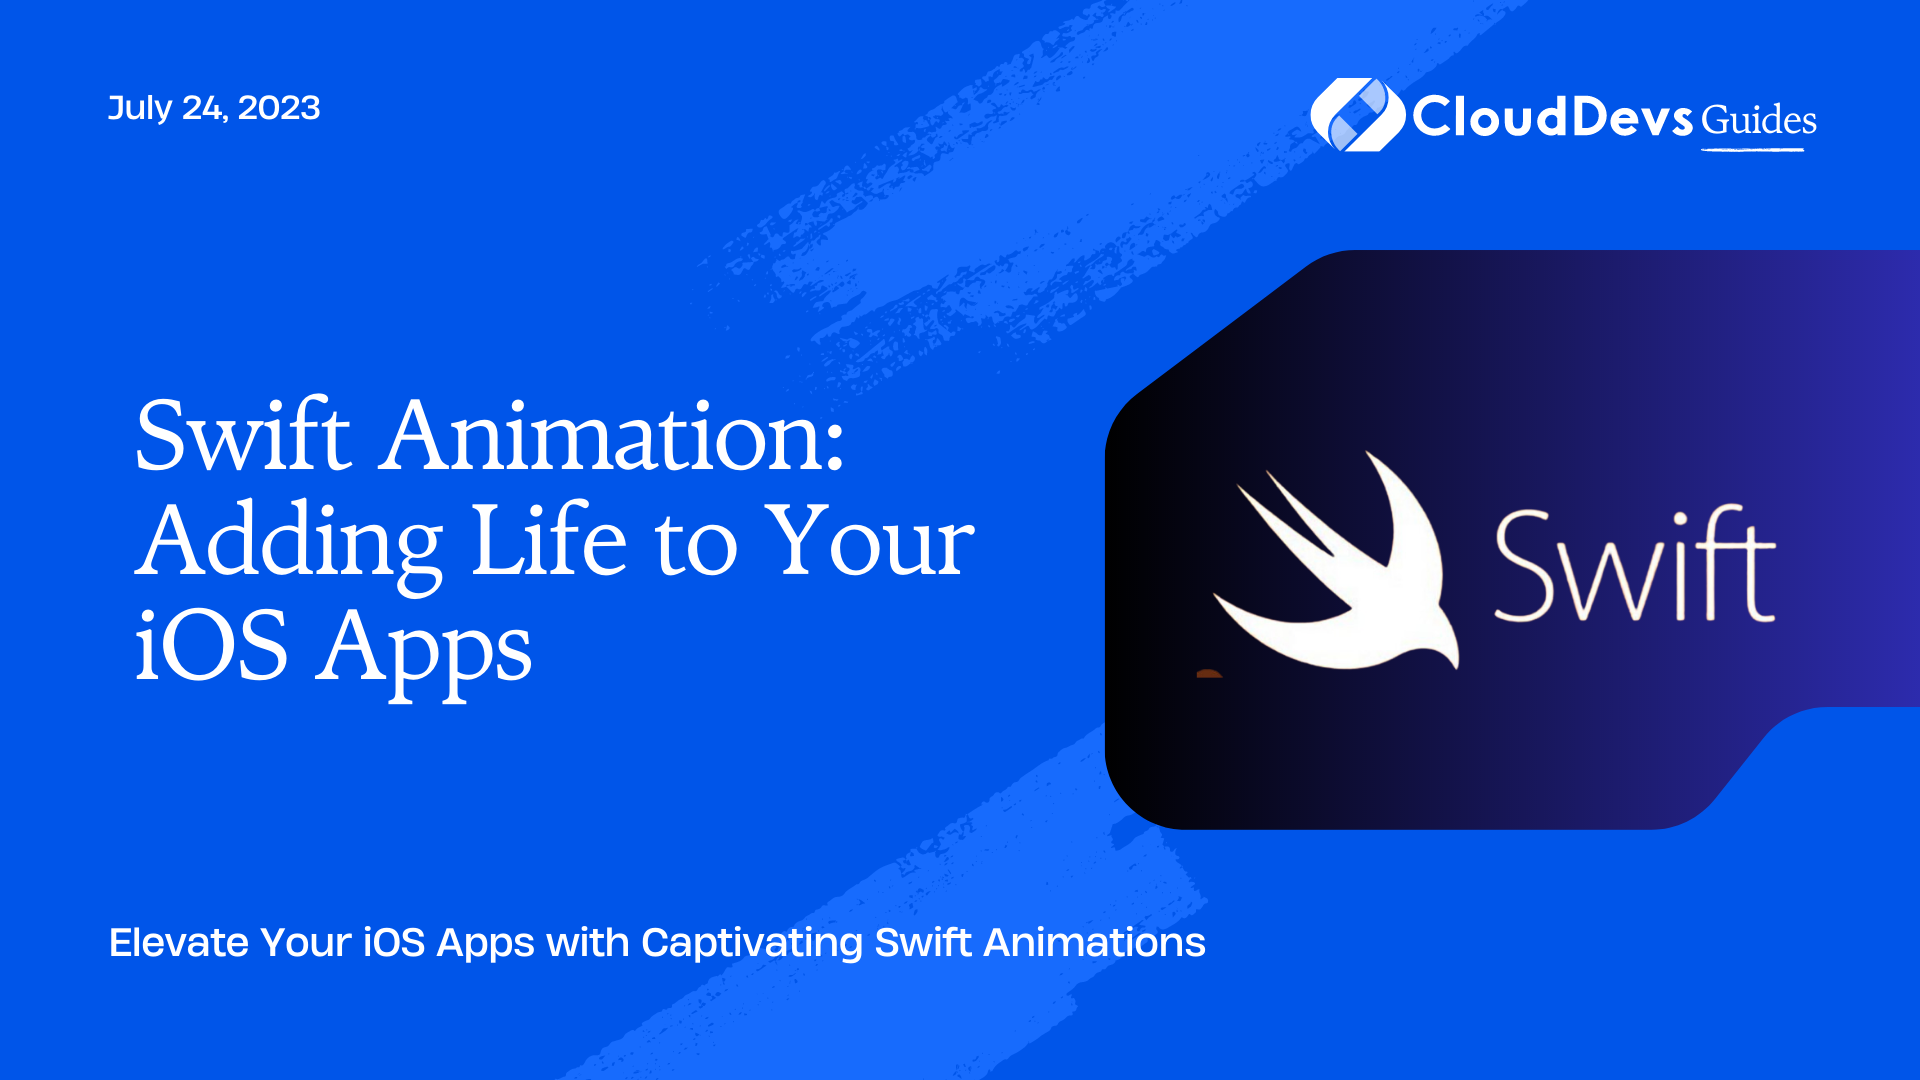 Swift Animation: Adding Life to Your iOS Apps